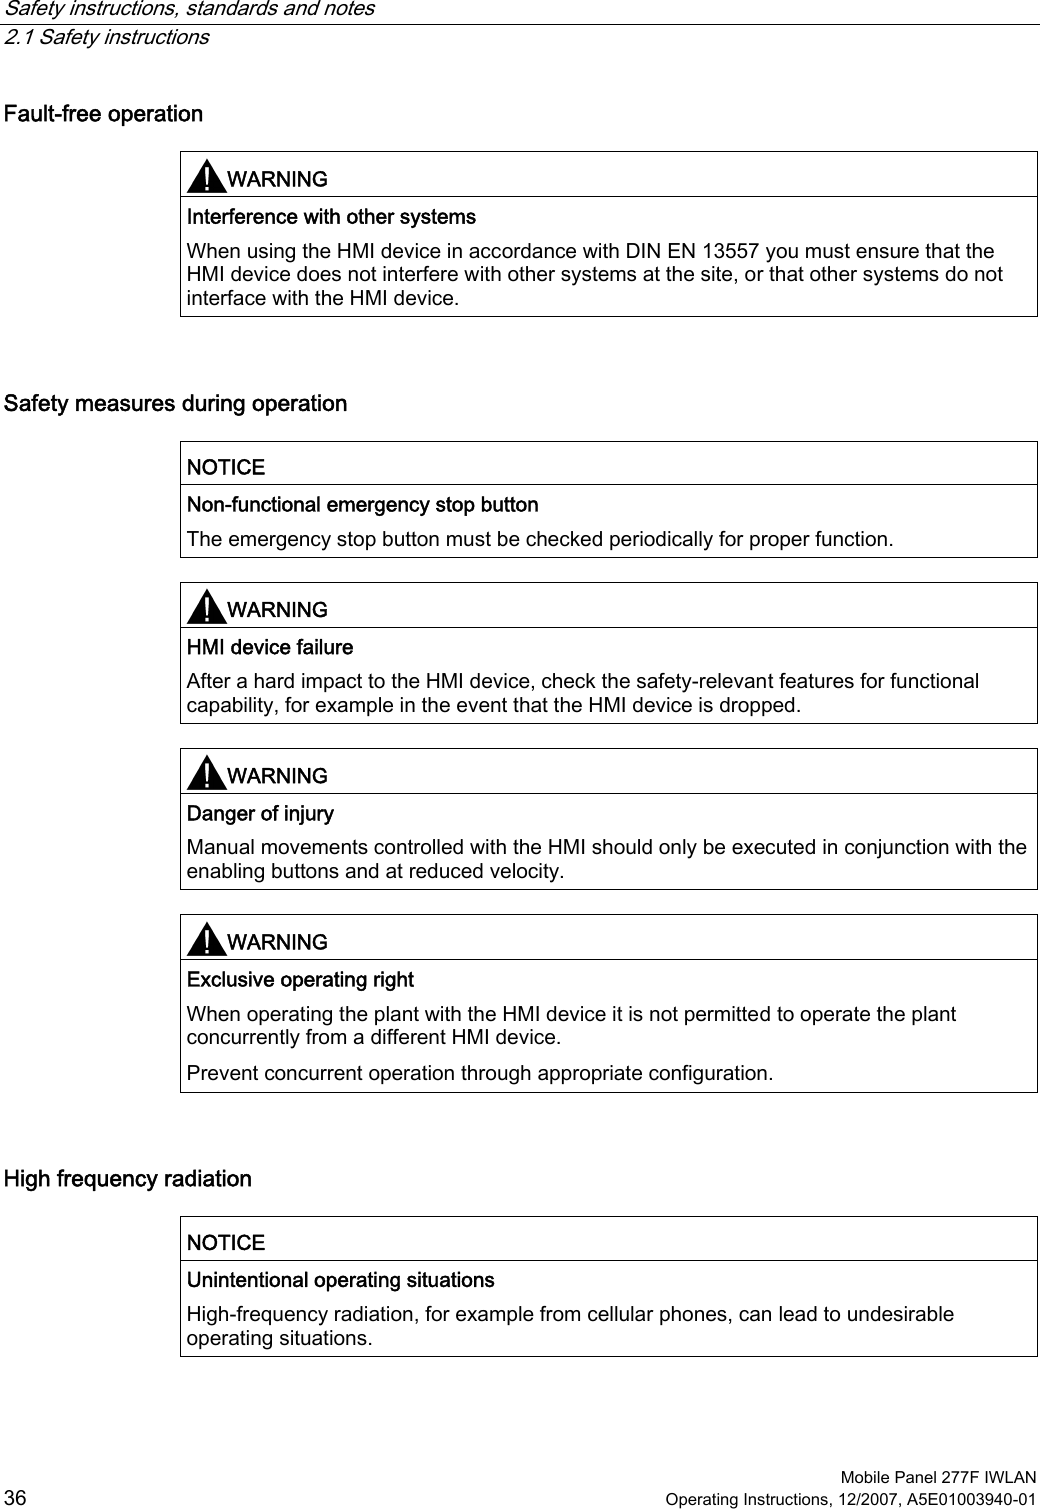 Safety instructions, standards and notes   2.1 Safety instructions  Mobile Panel 277F IWLAN 36 Operating Instructions, 12/2007, A5E01003940-01 Fault-free operation  WARNING  Interference with other systems When using the HMI device in accordance with DIN EN 13557 you must ensure that the HMI device does not interfere with other systems at the site, or that other systems do not interface with the HMI device.   Safety measures during operation  NOTICE  Non-functional emergency stop button The emergency stop button must be checked periodically for proper function.   WARNING  HMI device failure After a hard impact to the HMI device, check the safety-relevant features for functional capability, for example in the event that the HMI device is dropped.   WARNING  Danger of injury Manual movements controlled with the HMI should only be executed in conjunction with the enabling buttons and at reduced velocity.   WARNING  Exclusive operating right When operating the plant with the HMI device it is not permitted to operate the plant concurrently from a different HMI device. Prevent concurrent operation through appropriate configuration.  High frequency radiation  NOTICE  Unintentional operating situations High-frequency radiation, for example from cellular phones, can lead to undesirable operating situations.  